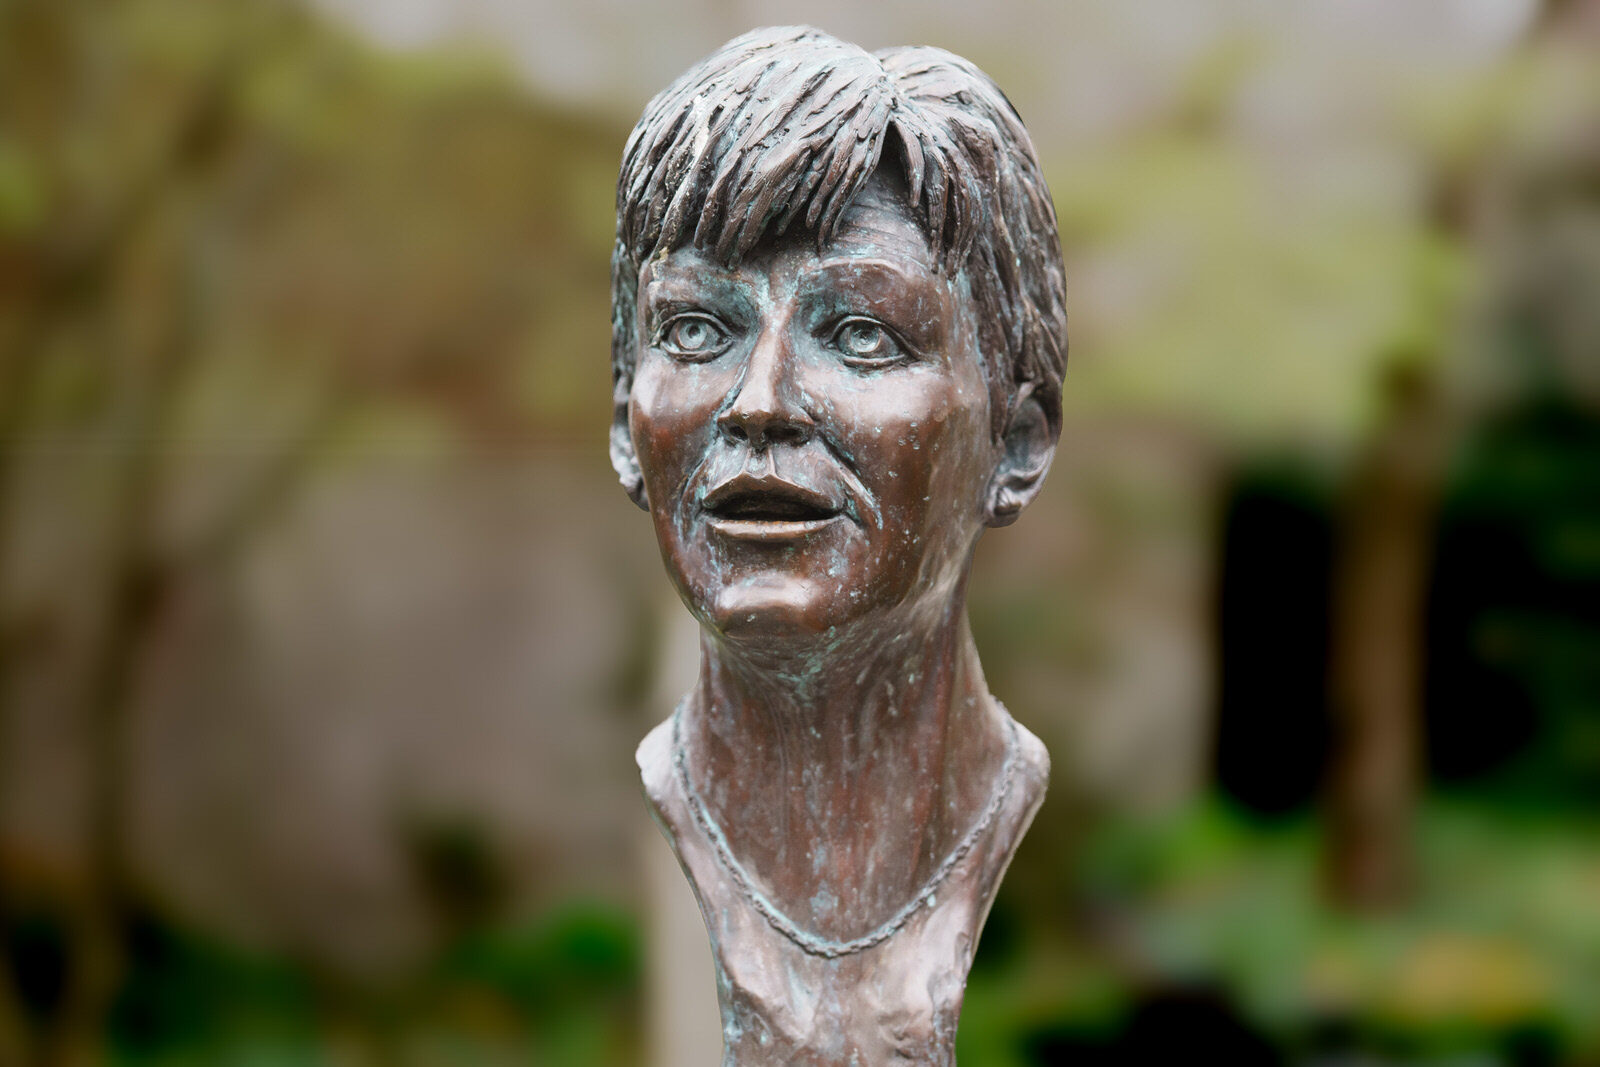 VERONICA GUERIN MEMORIAL [I USE THIS SCULPTURE AT DUBLIN CASTLE AS A REFERENCE]-229869-1